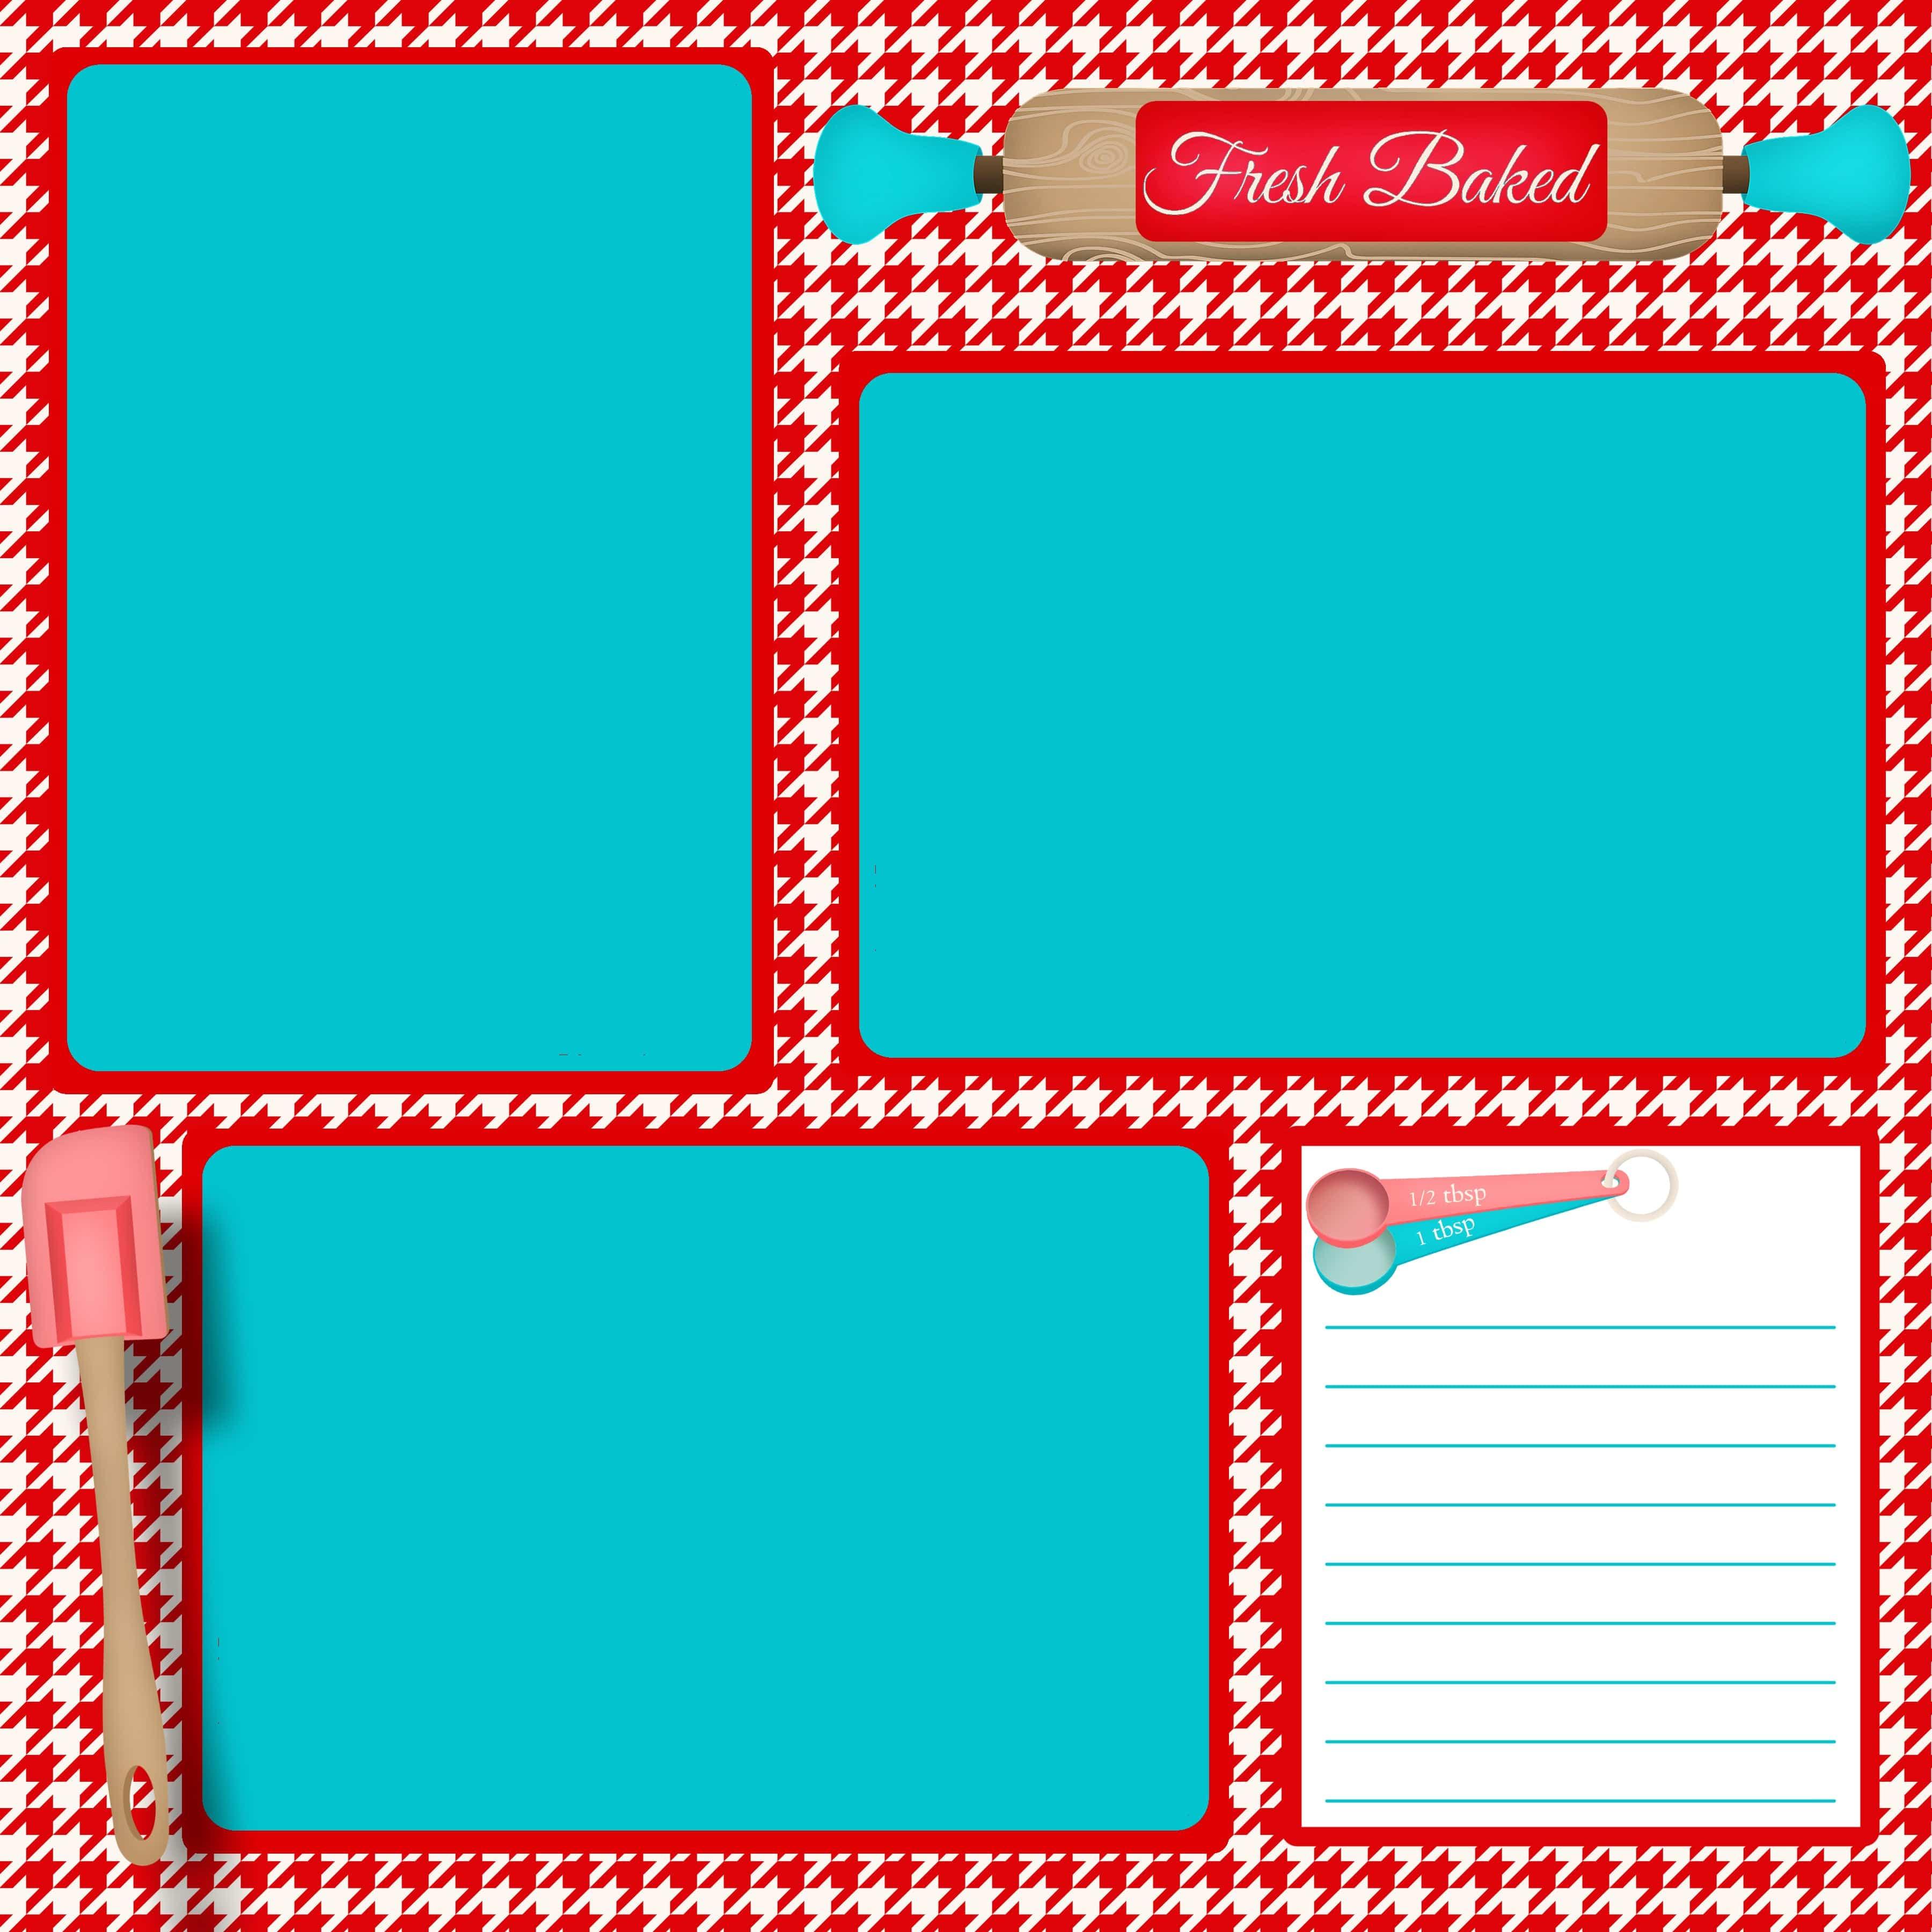 SSC Designs | What's Baking? Printed Scrapbook Pages